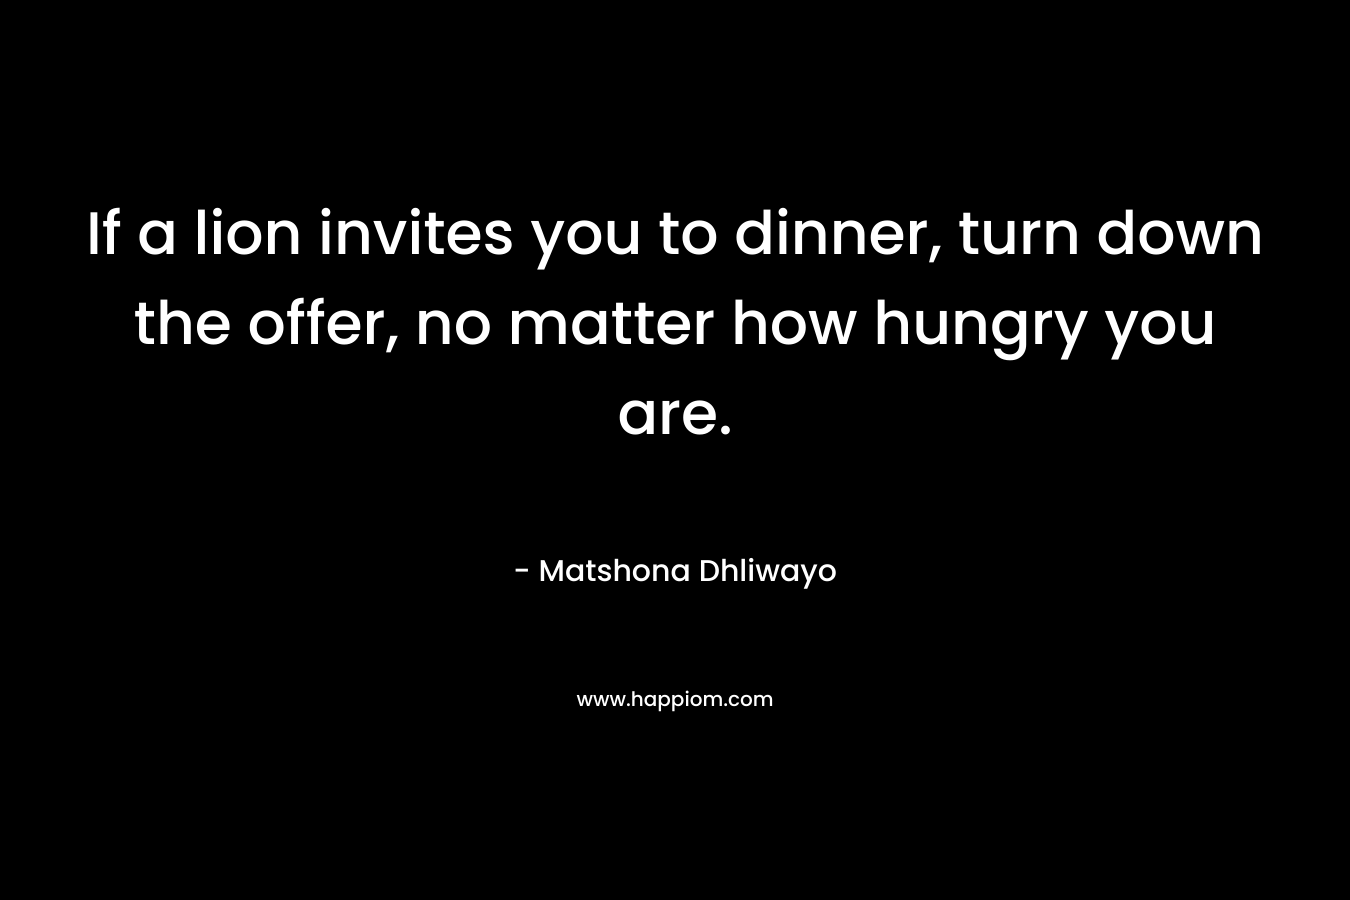 If a lion invites you to dinner, turn down the offer, no matter how hungry you are. – Matshona Dhliwayo